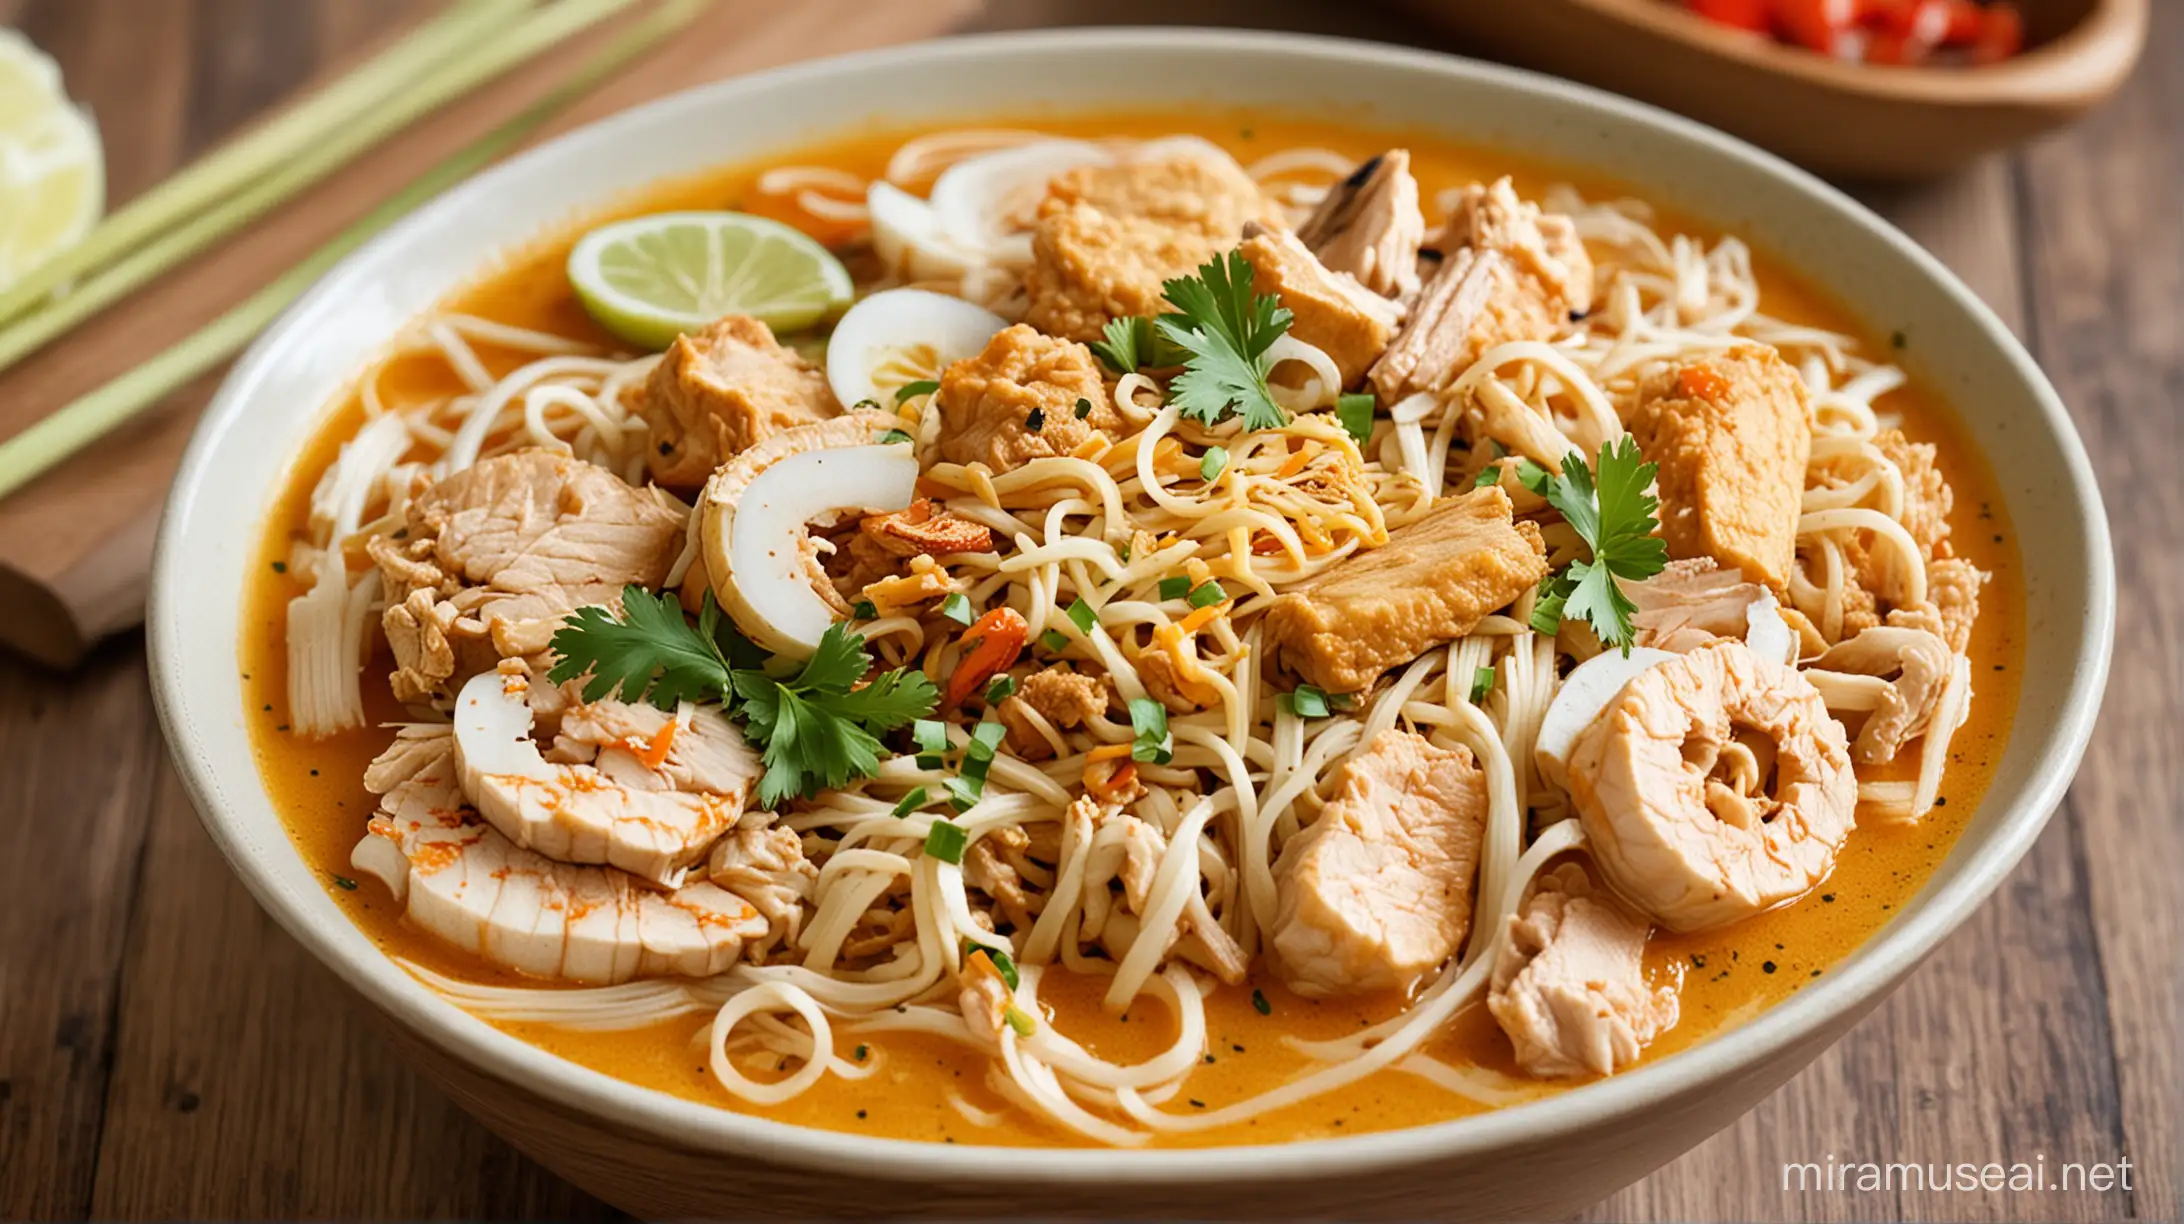 Malaysian Laksa: A colorful bowl of laksa with soft fried noodles, soaked in a broth made from lemongrass, ginger, onions and coconut milk, accompanied by chicken or seafood, creating a rich and delicious image of Malaysian cuisine.